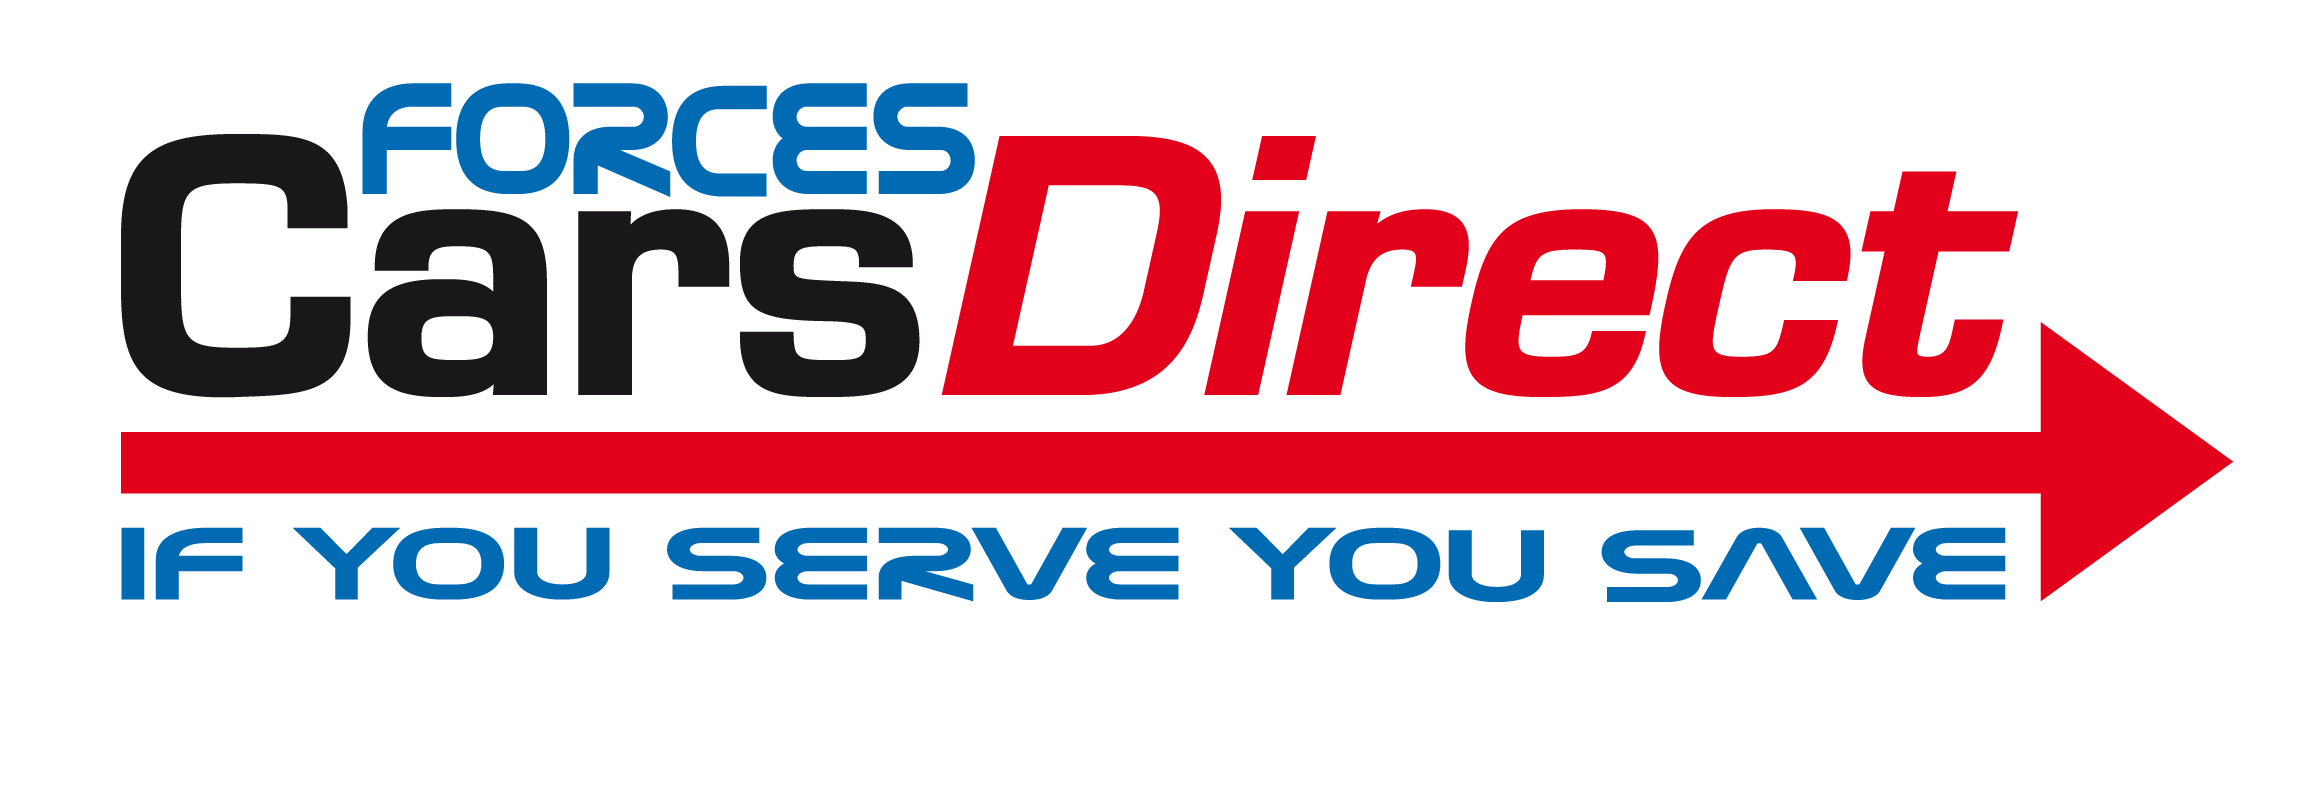 Forces Cars Direct